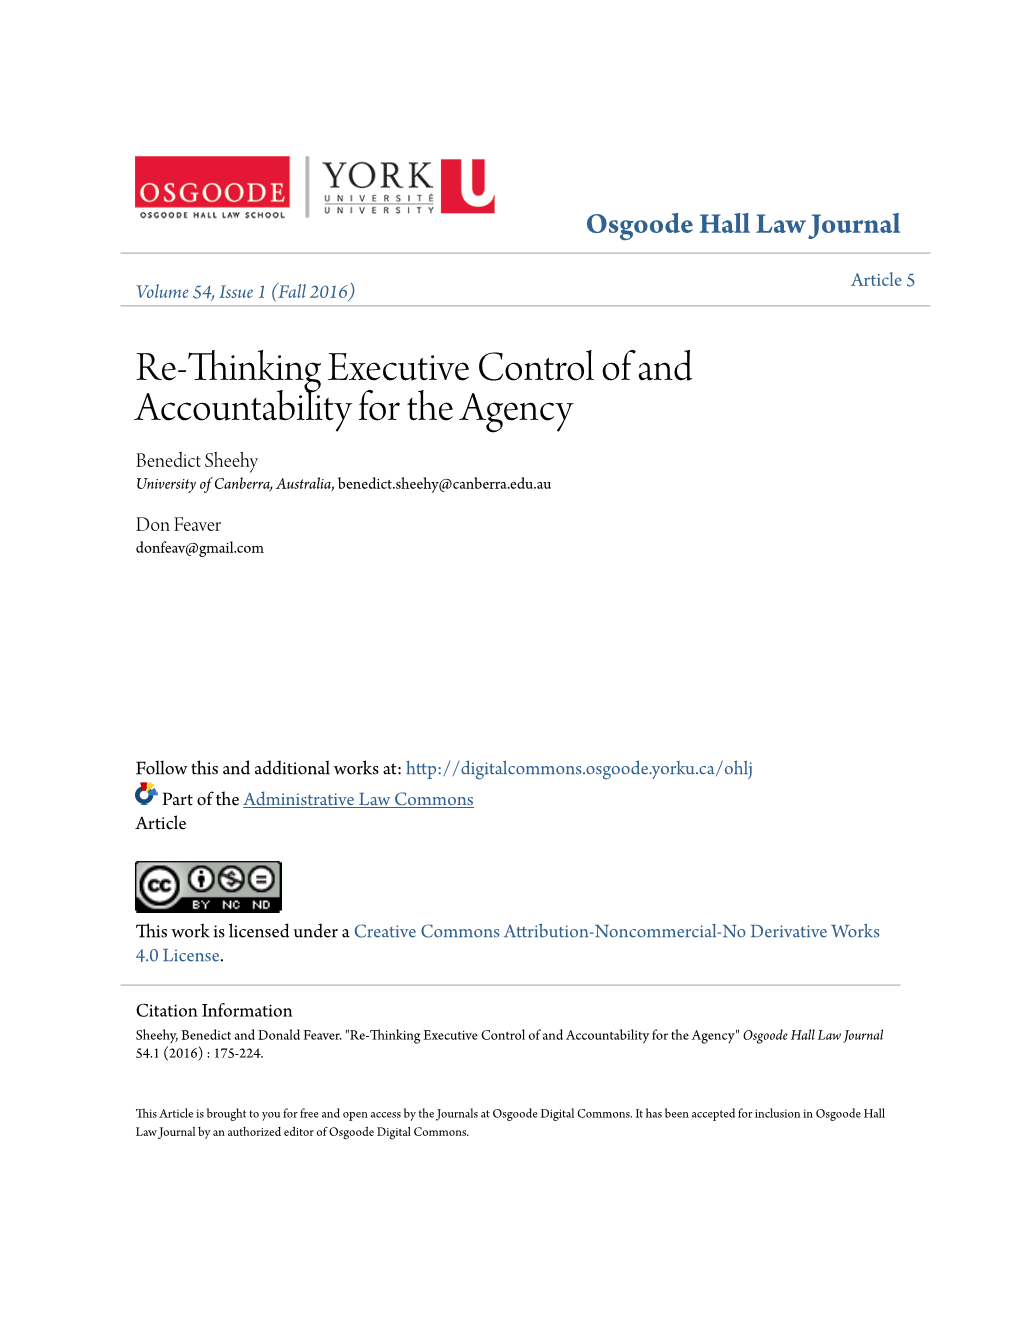 Re-Thinking Executive Control of and Accountability for the Agency Benedict Sheehy University of Canberra, Australia, Benedict.Sheehy@Canberra.Edu.Au